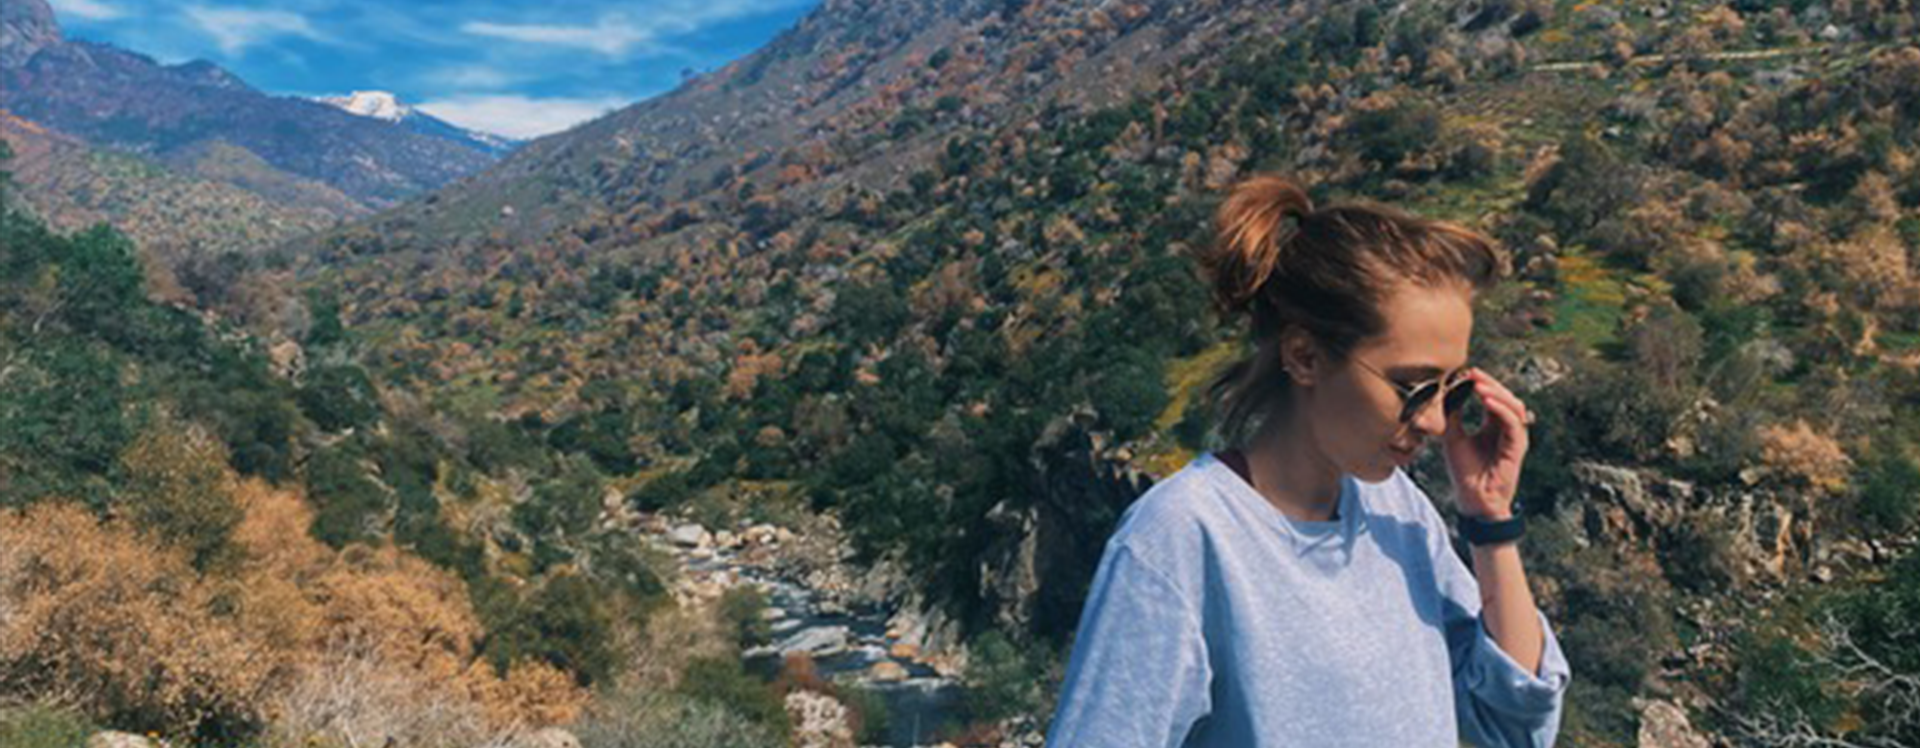 Briana Martinez on a hike with a mountain range behind her.